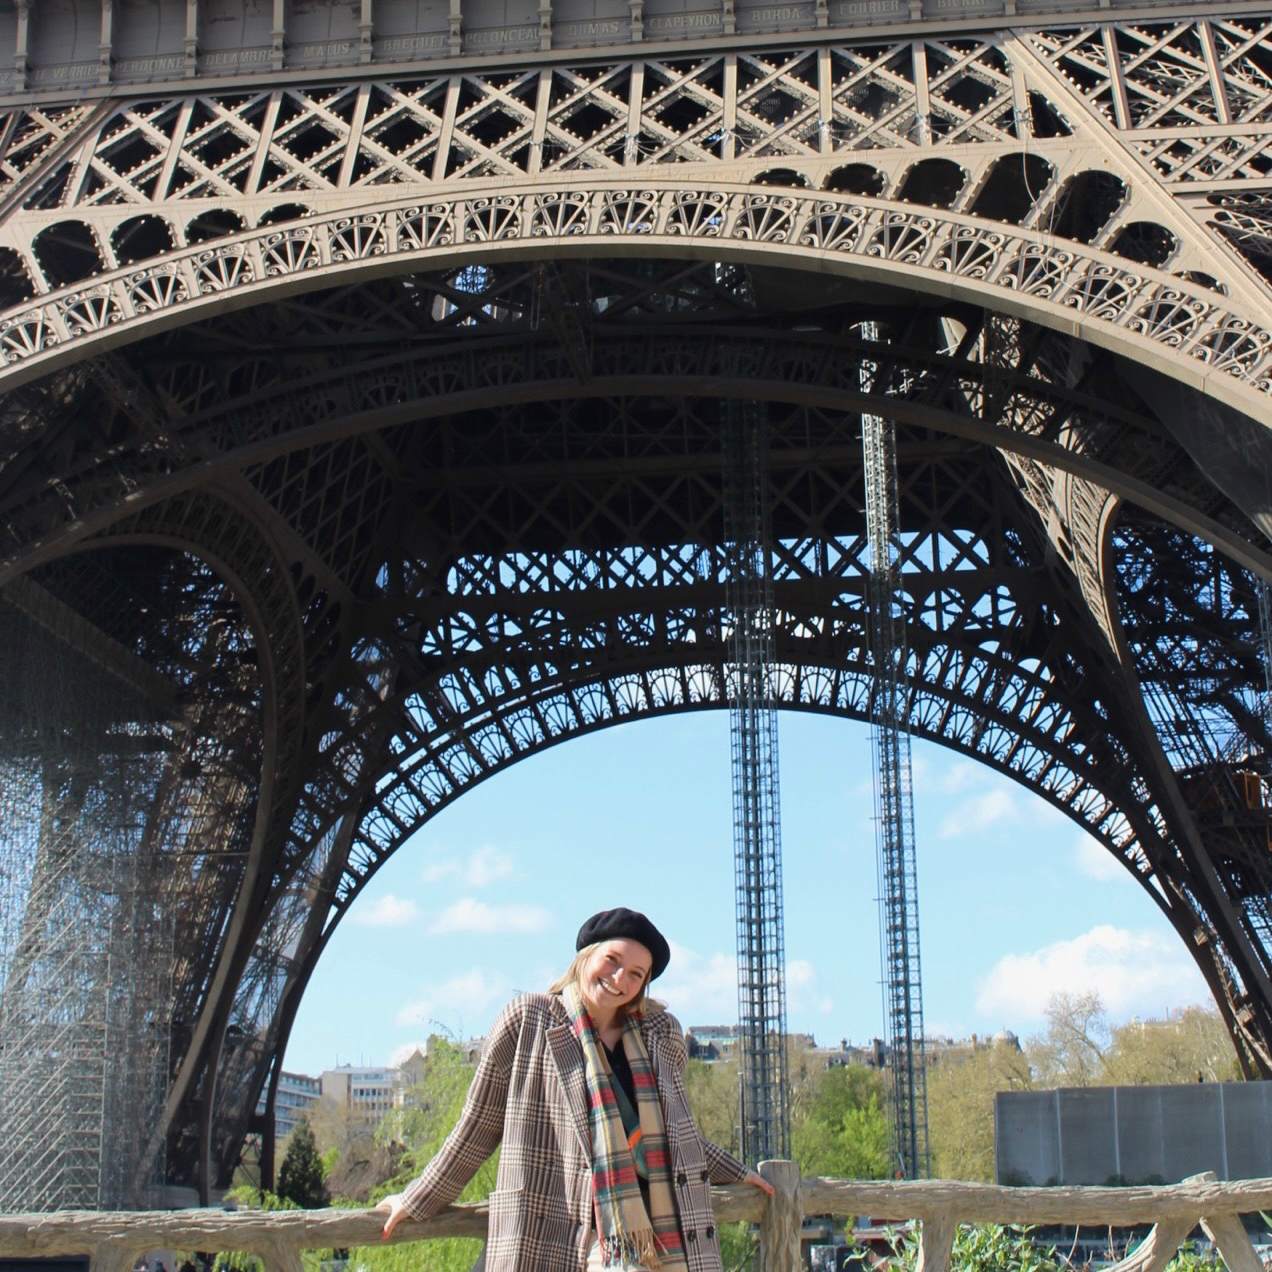 Sophie smiles as she stands beneath the Eiffel Tower